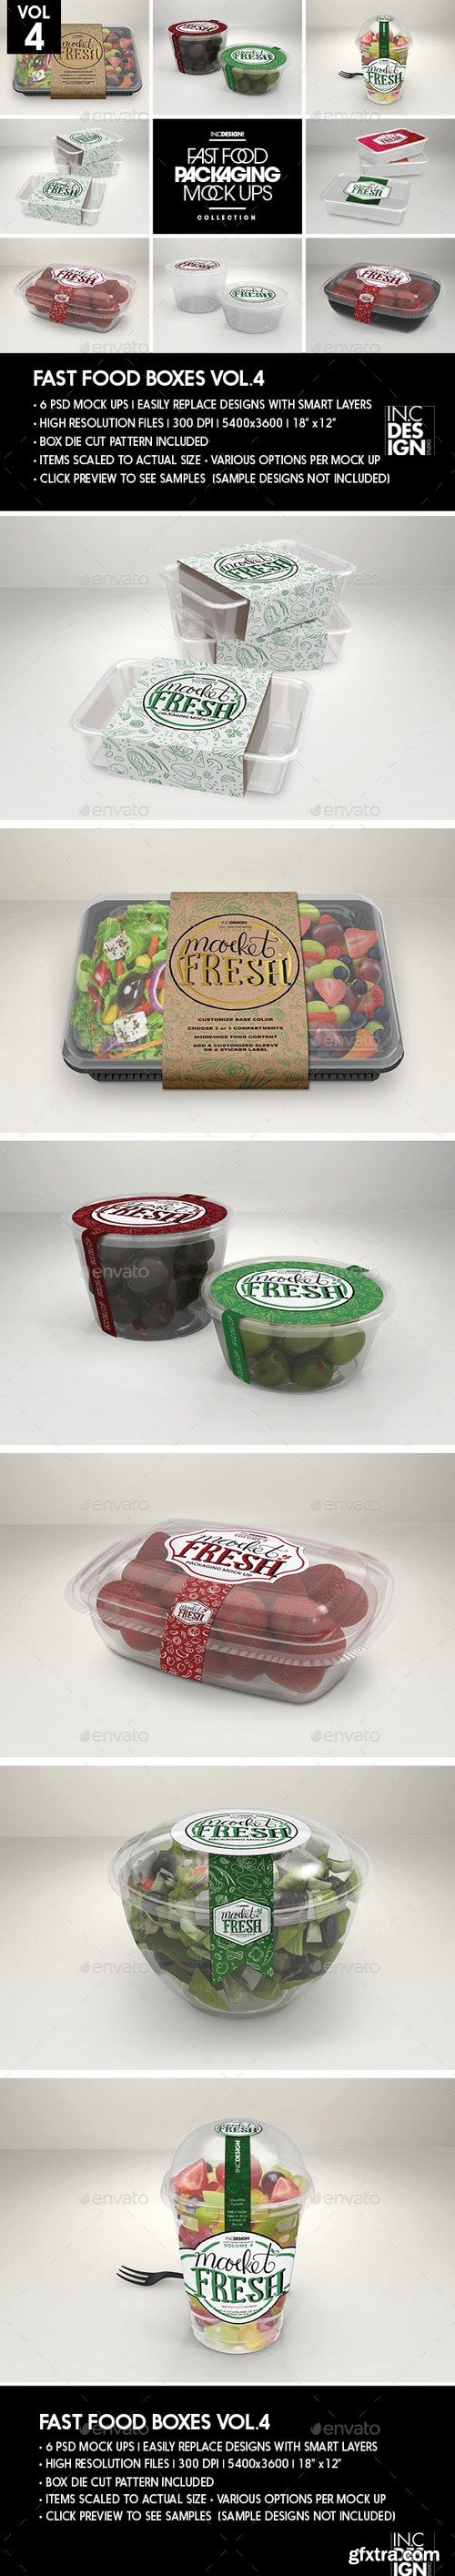 Graphicriver - Fast Food Boxes Vol.4: Take Out Packaging MockUps 17969199